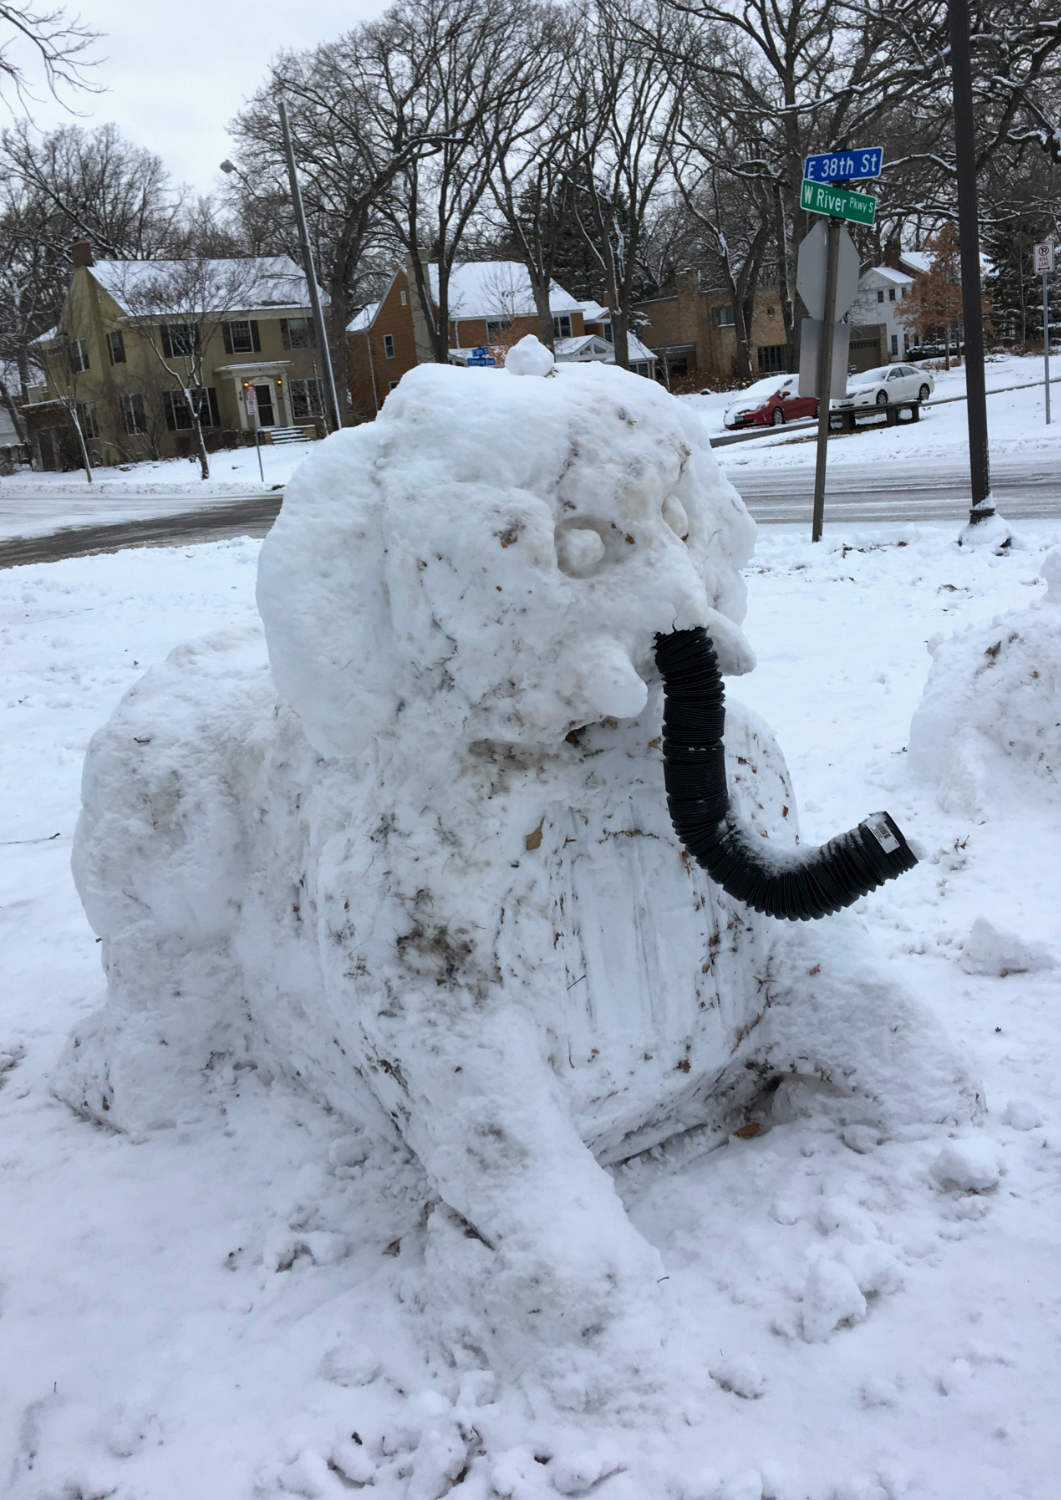 Elephant sculpted from snow with a black flex hose for trunk